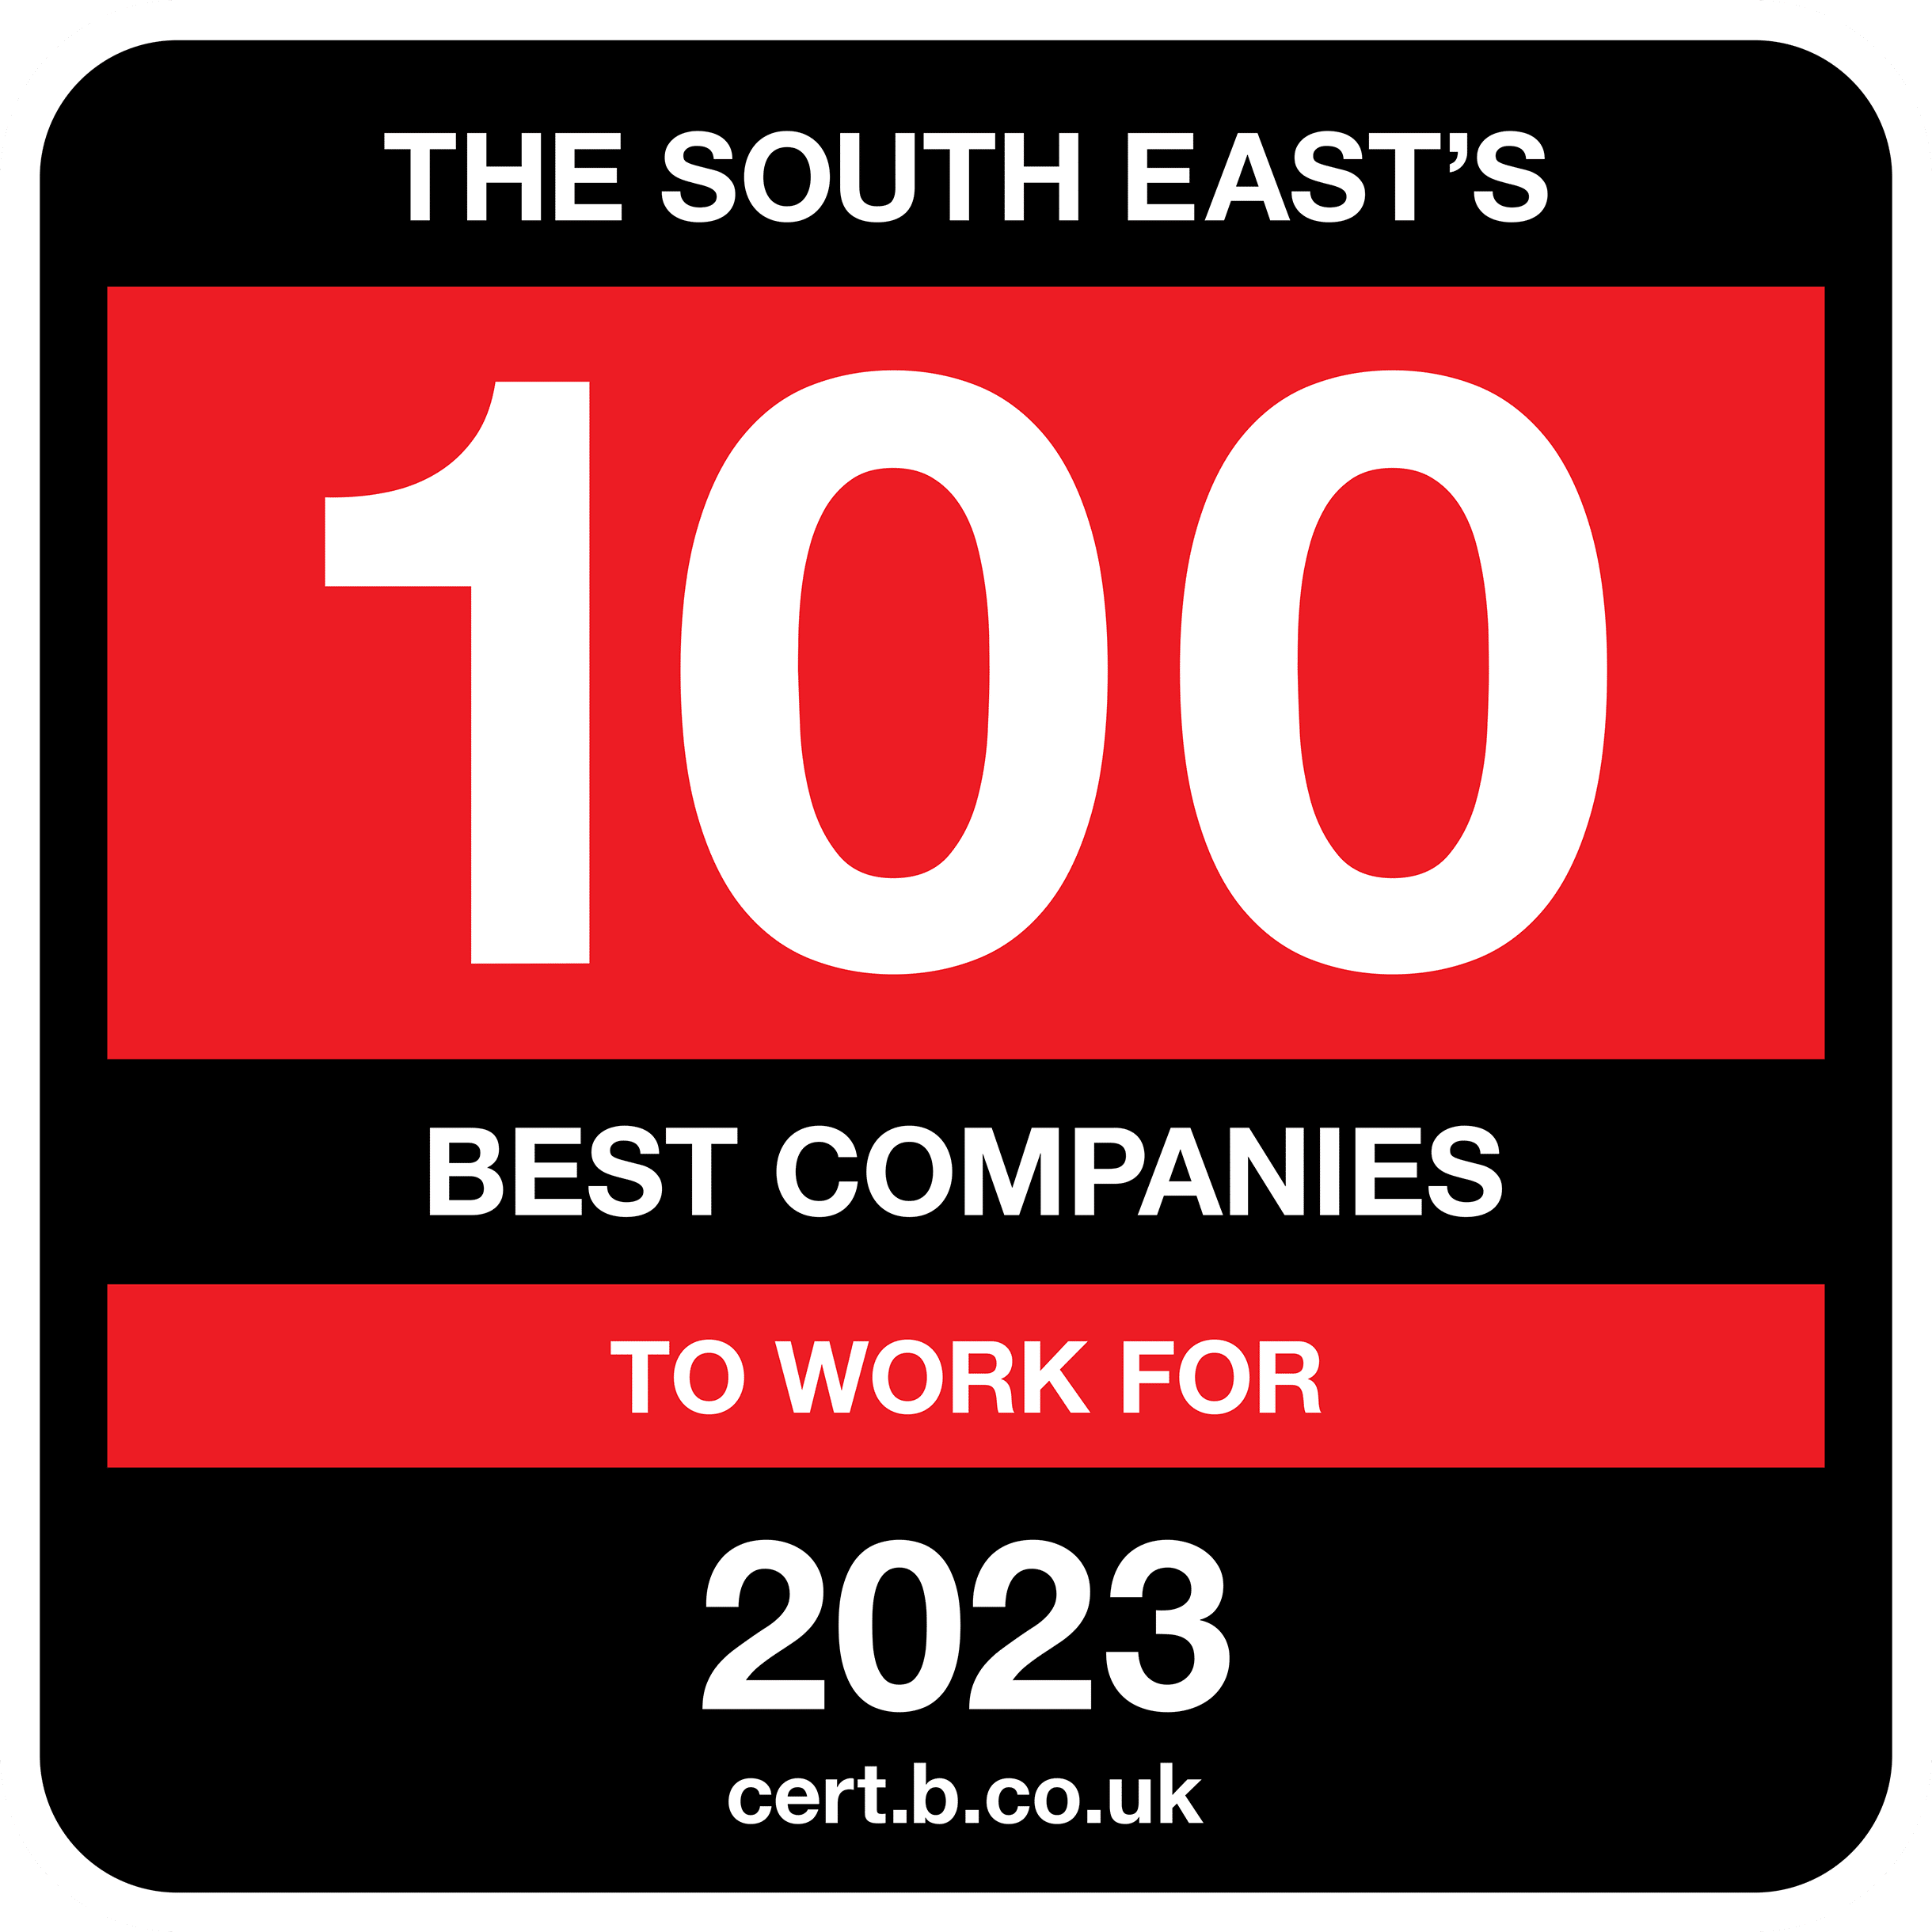 The South East's Top 100 Best Companies to work for 2023